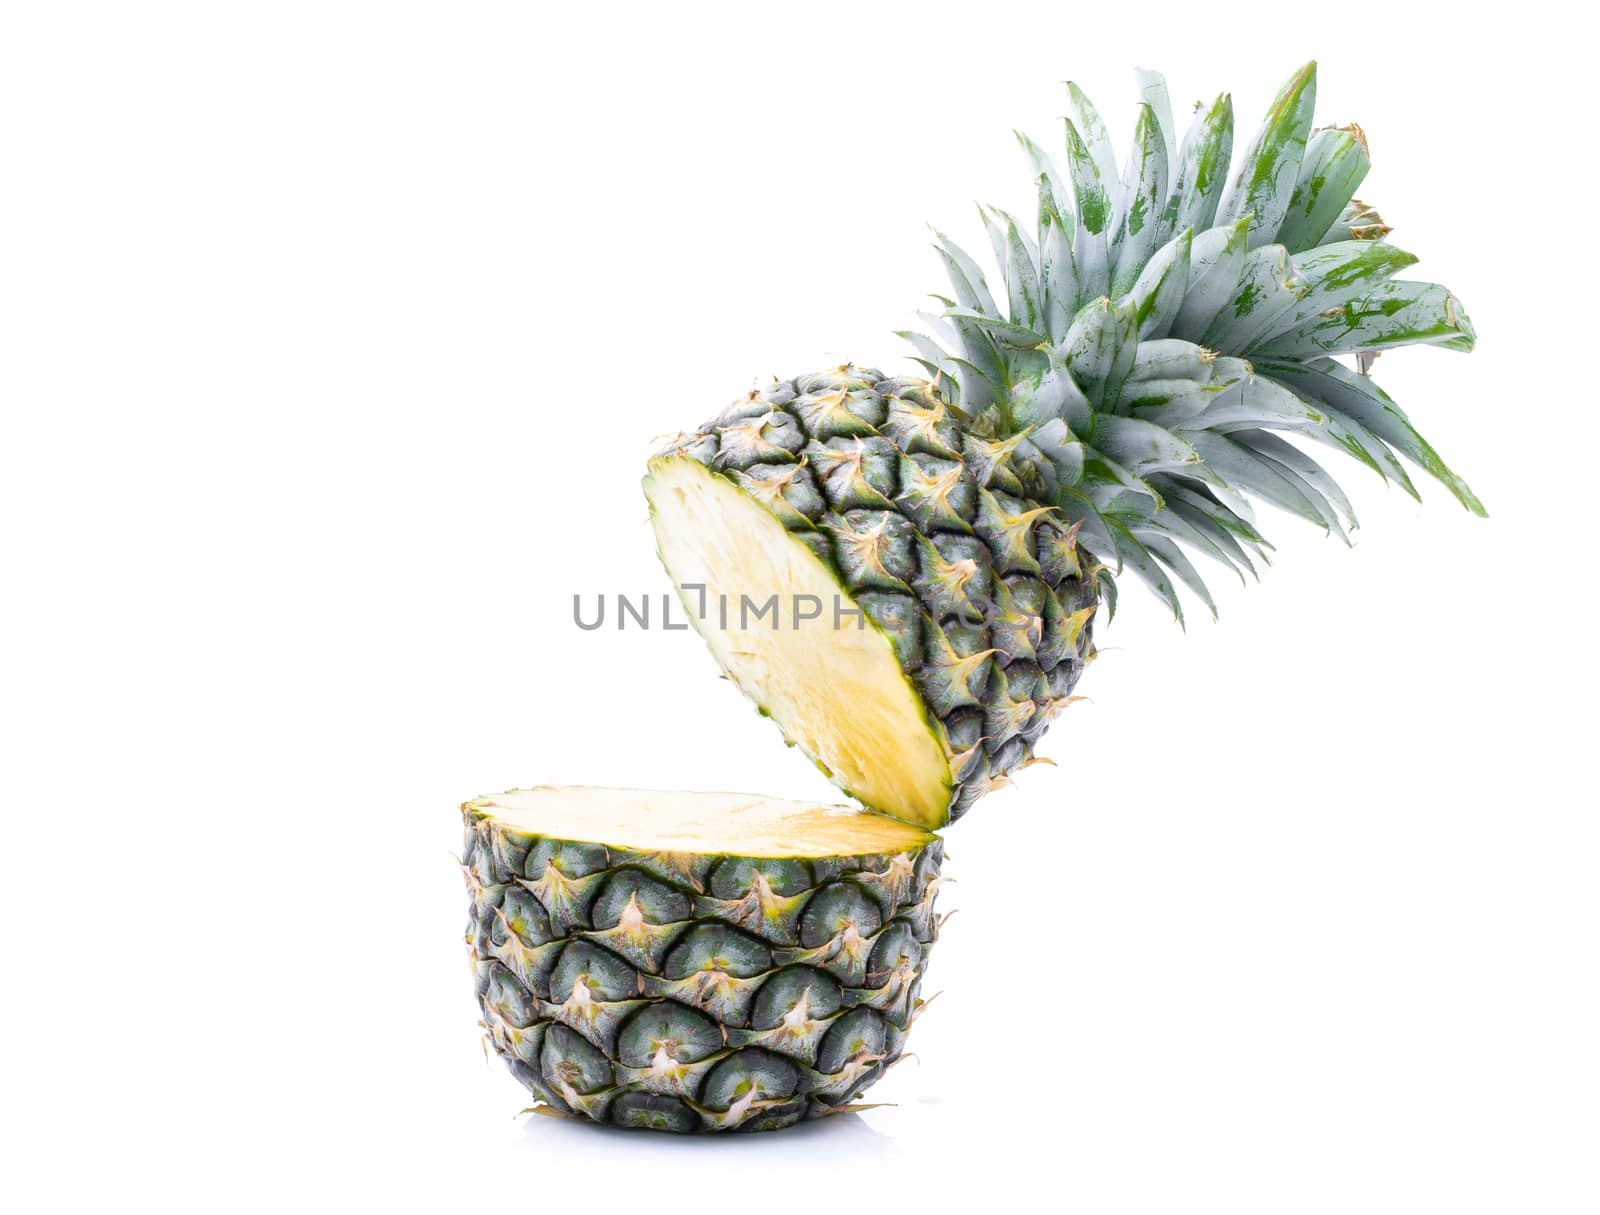 Fruit pineapple on a white background by sompongtom